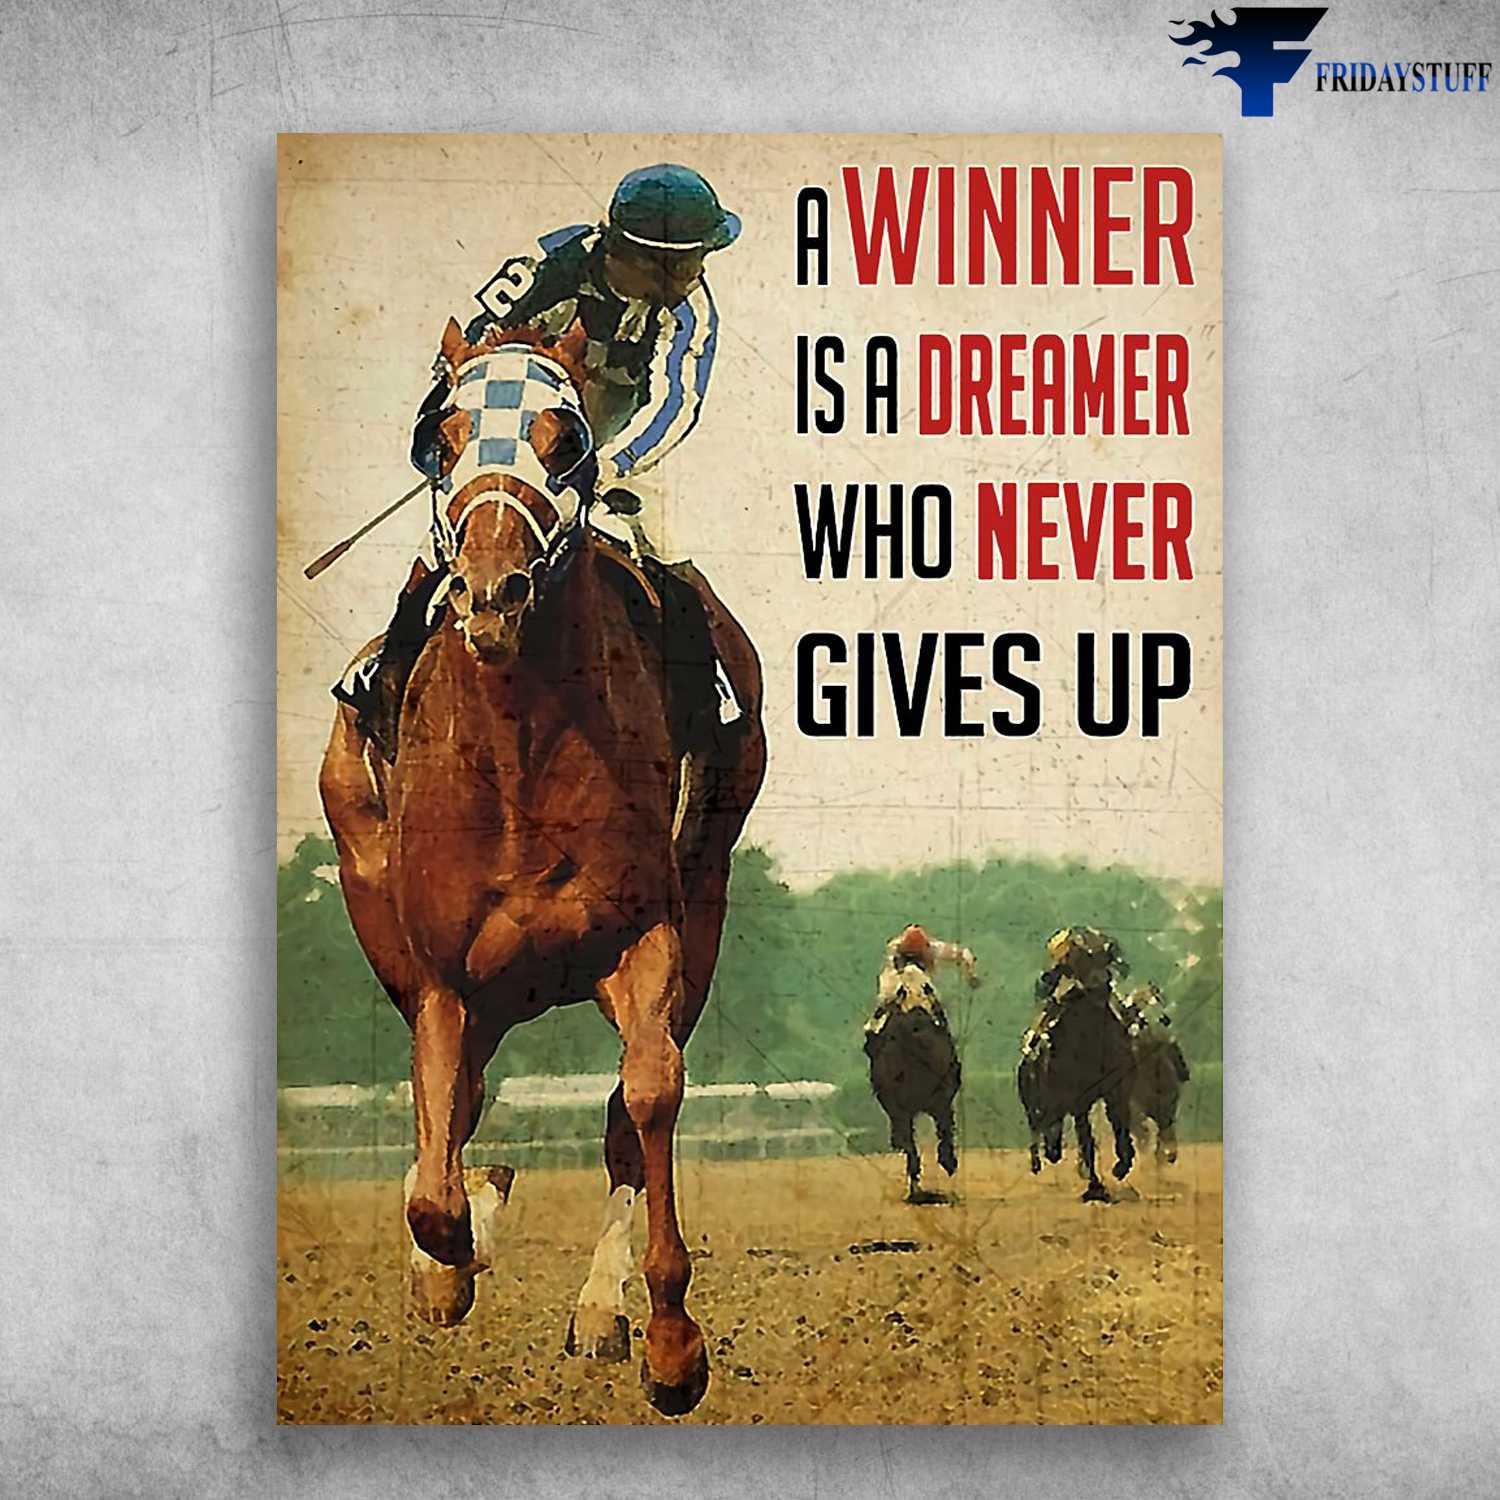 Horse Riding, Racing Horse Poster - A Winner Is A Dreamer, Who Never Gives Up